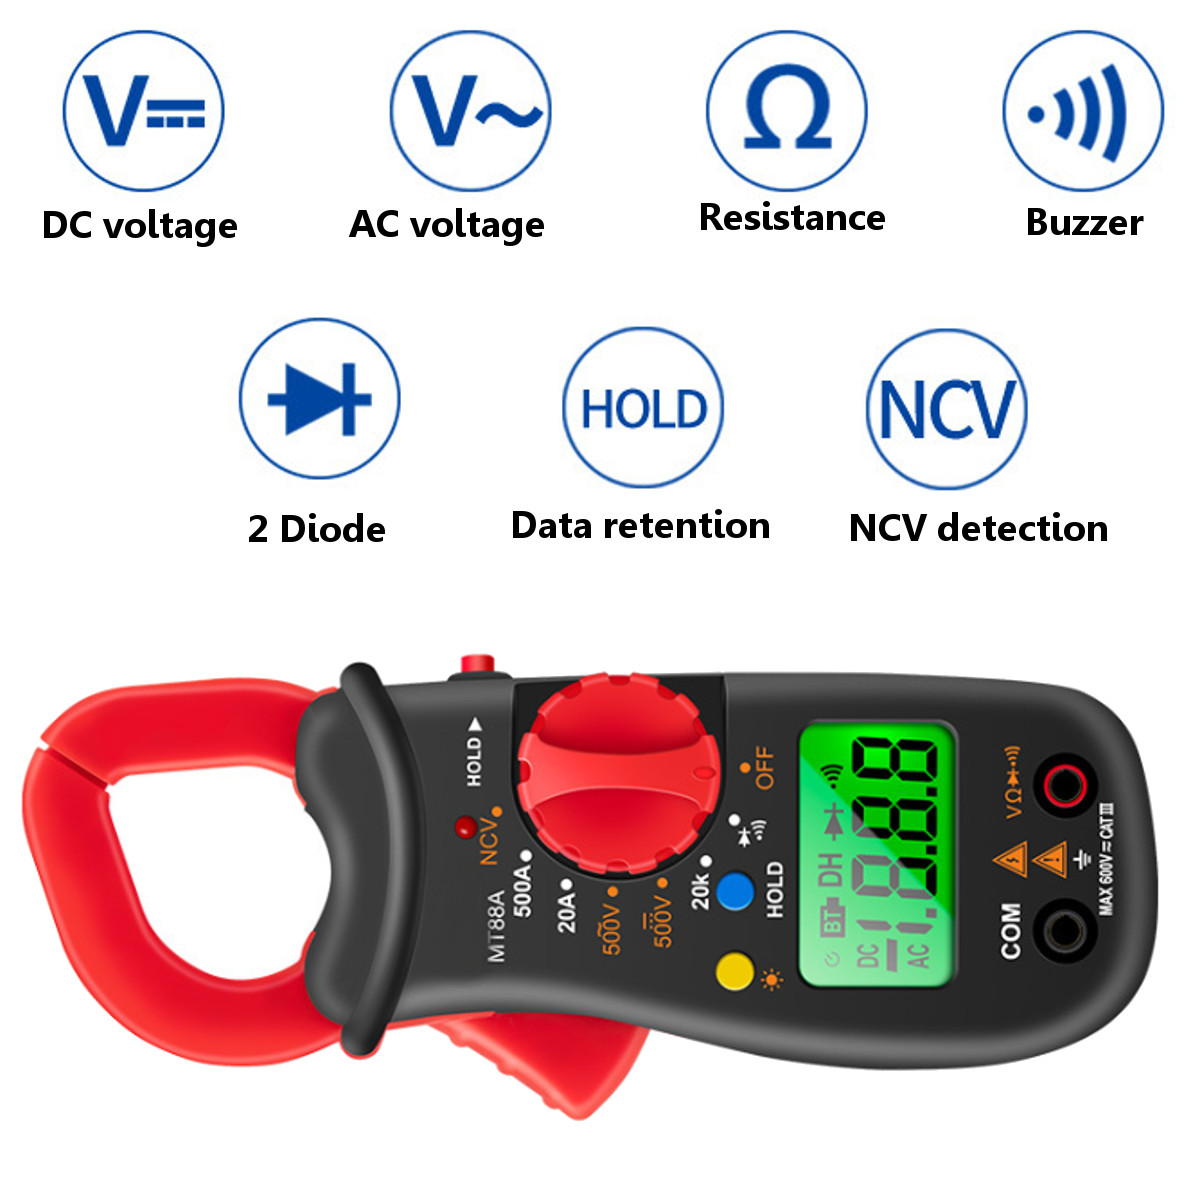 ANENG-MT88A-Digital-Clamp-Meter-Multimeter-DCAC-Voltage-AC-Current-Tester-Frequency-Capacitance-NCV--1751874-3